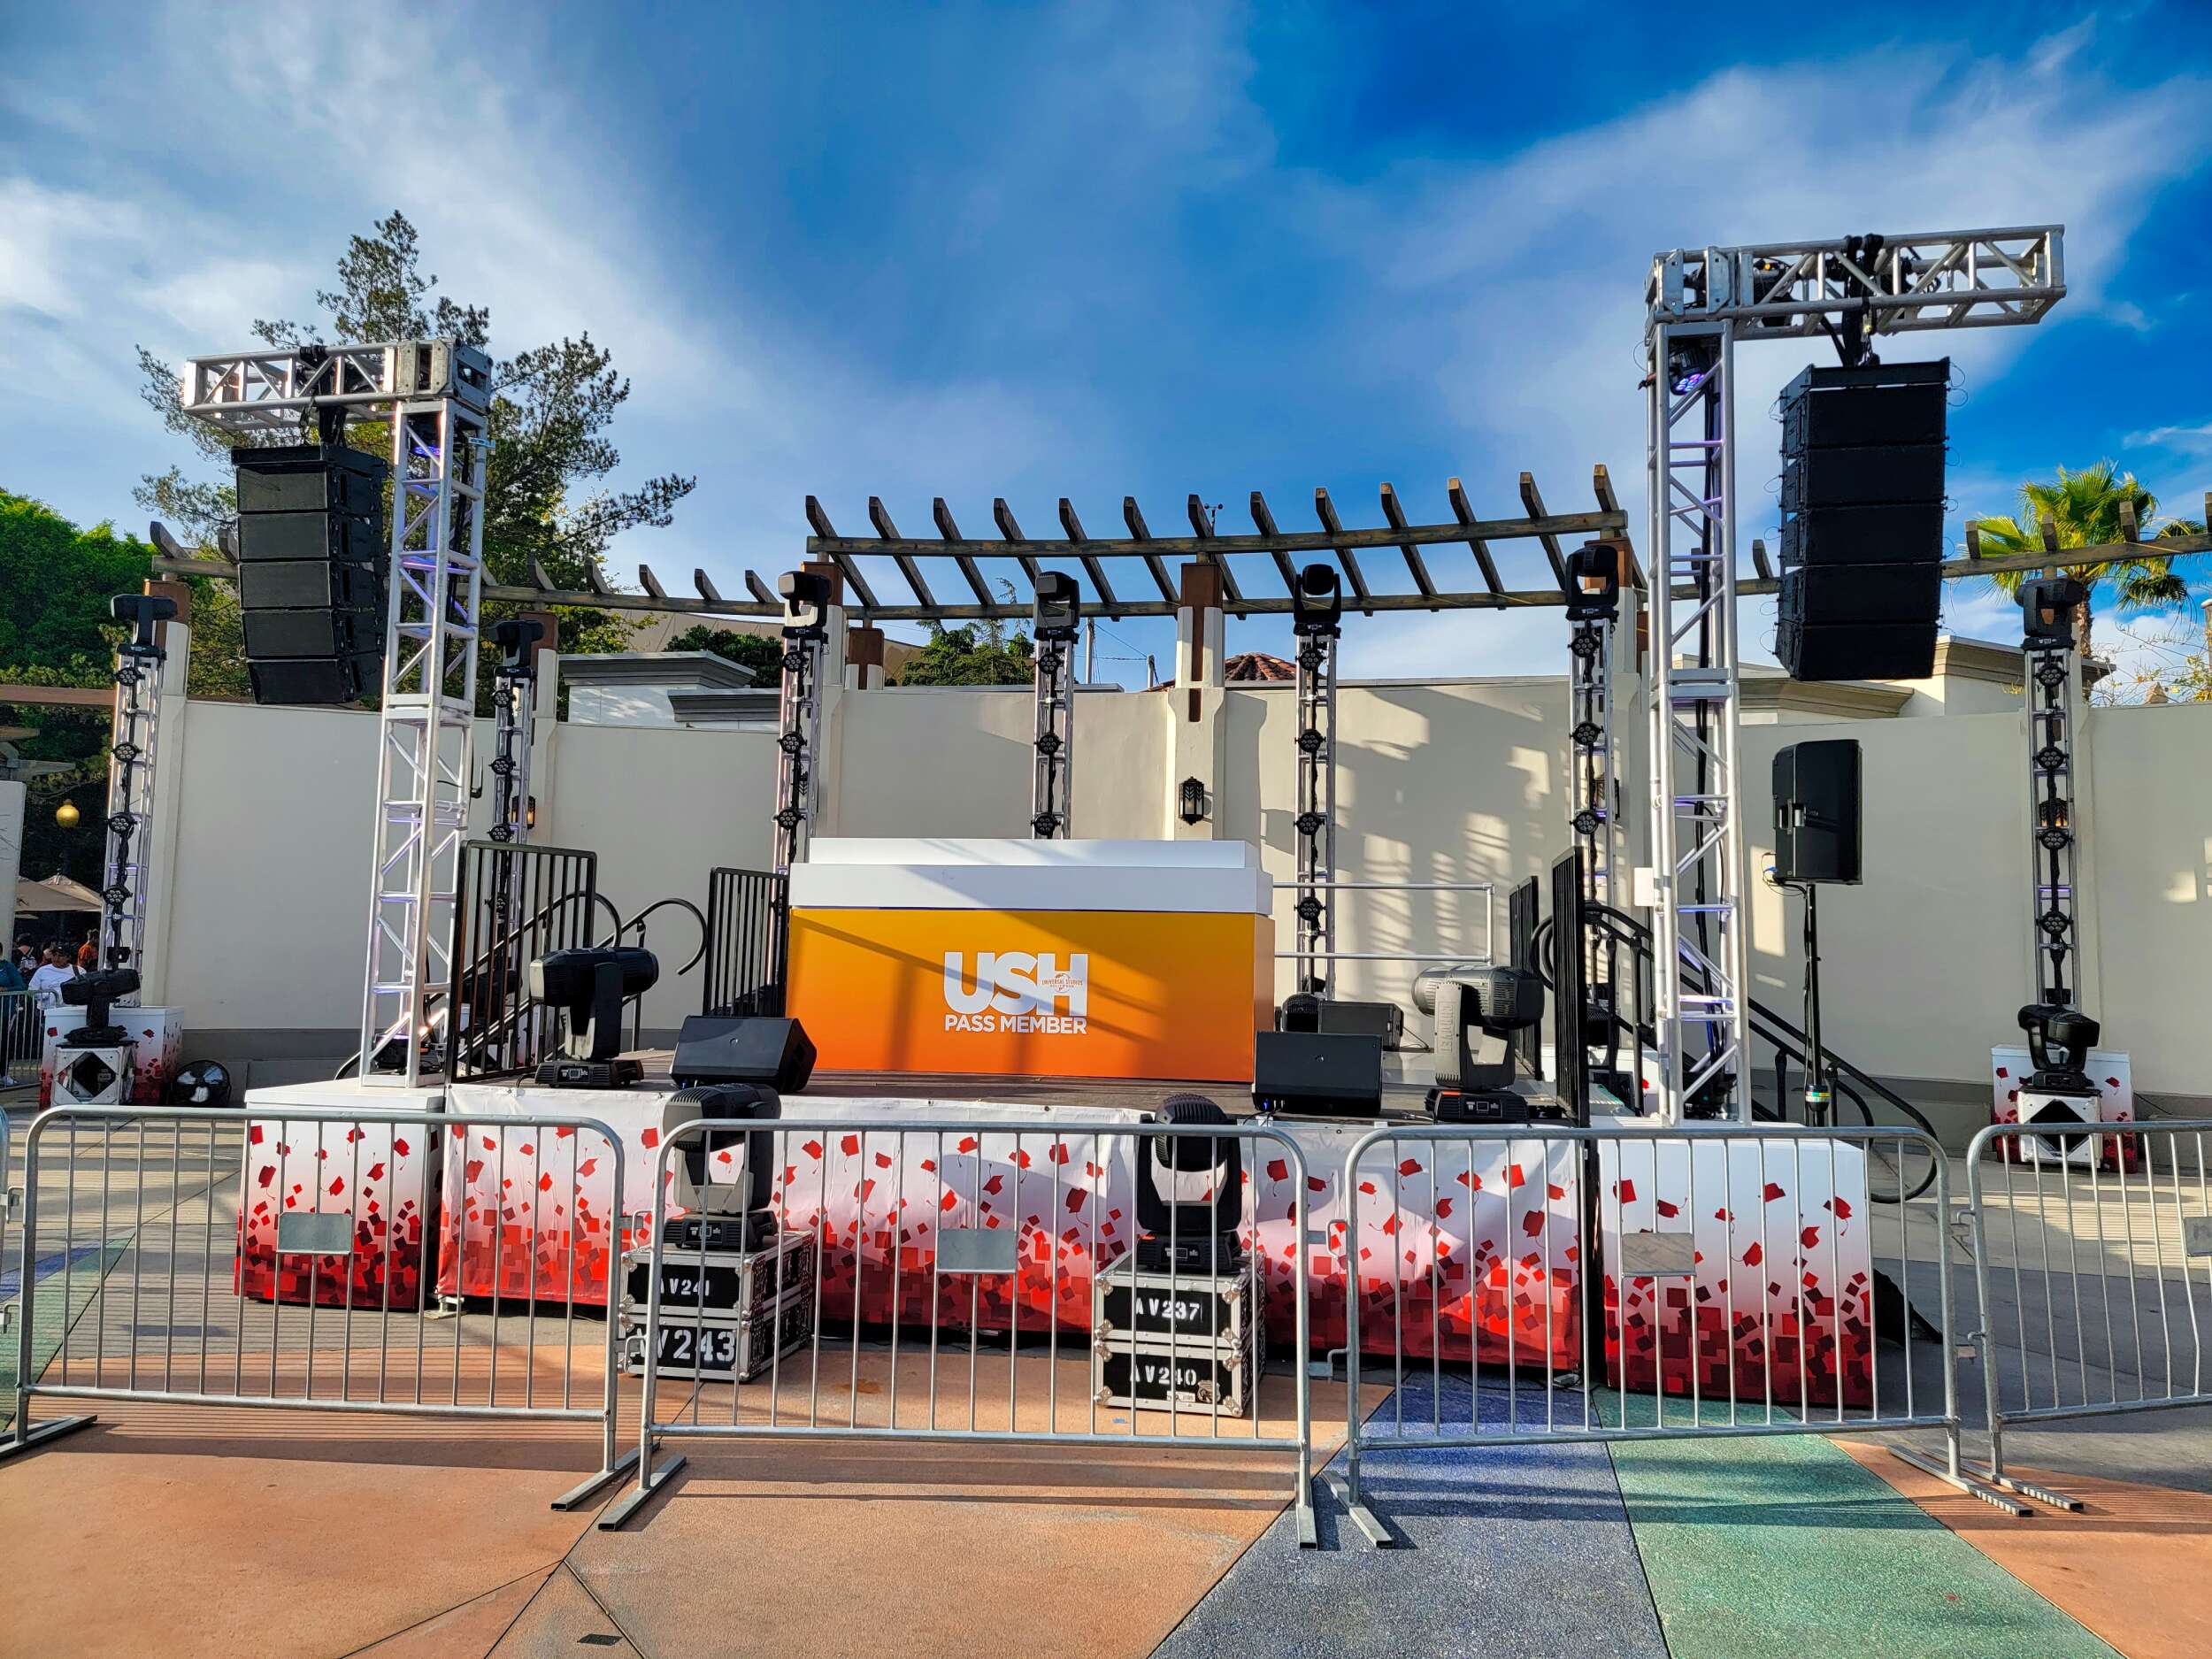 USH Pass Member Park Takeover Night DJ Stage before opening